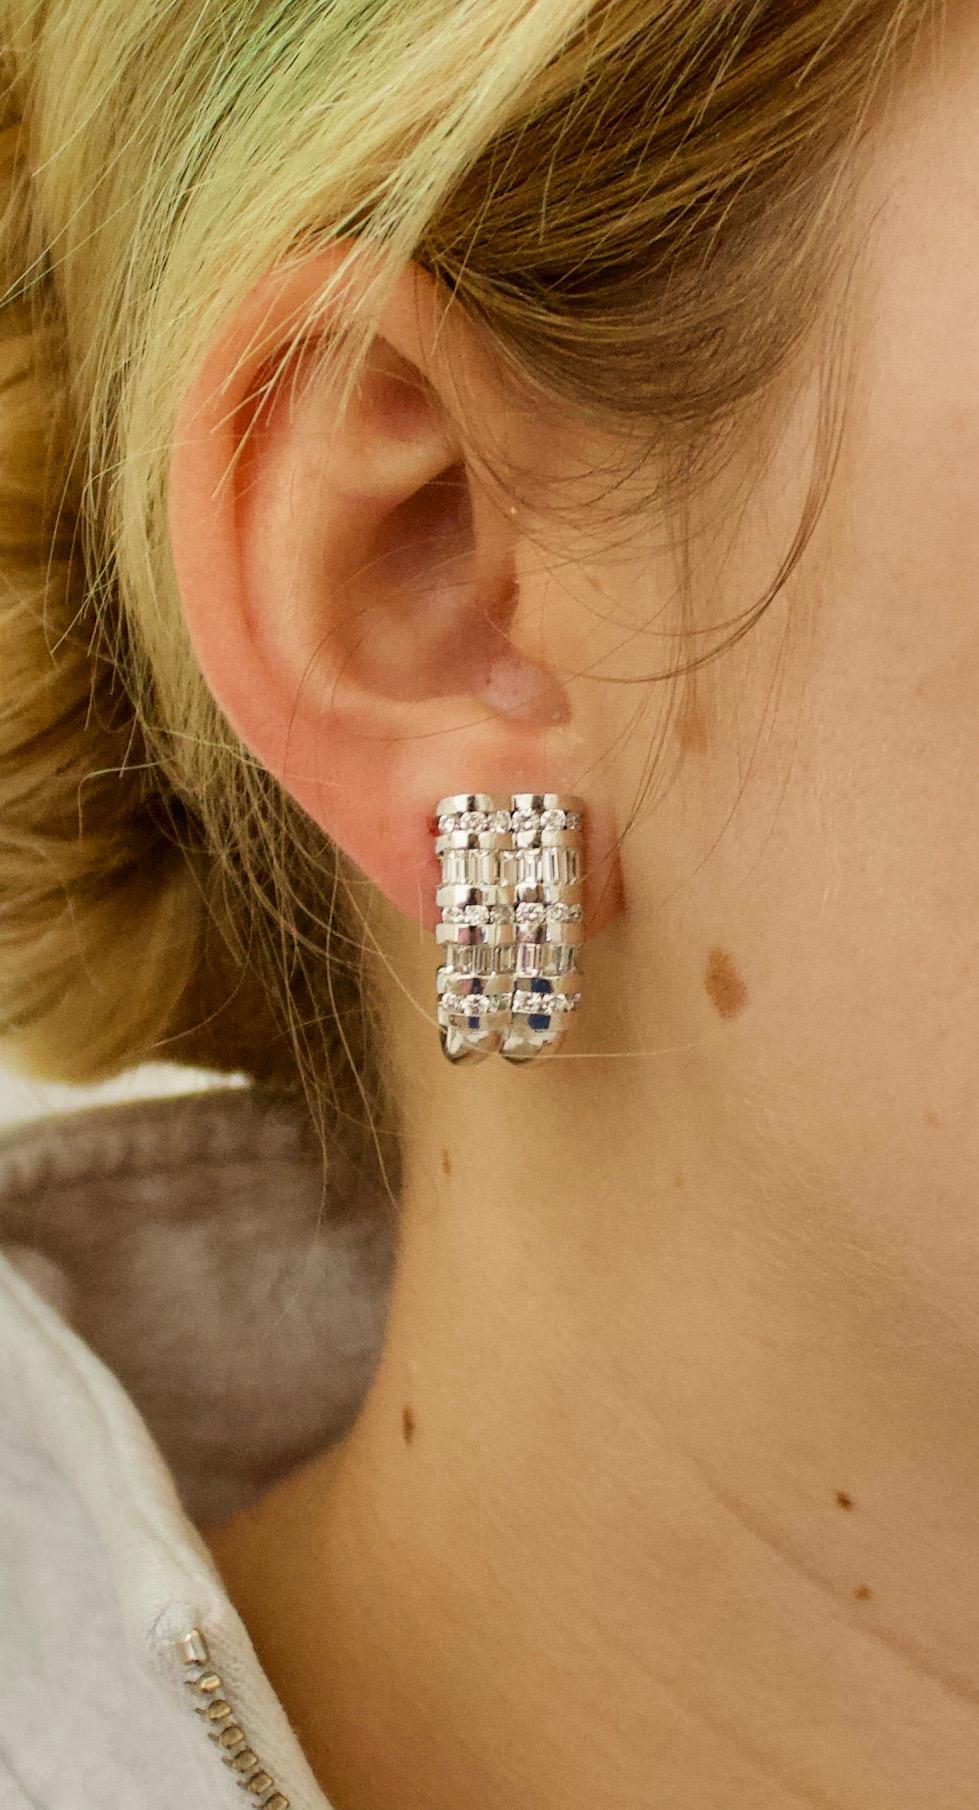 Women's or Men's Chanel Set Diamond  Earrings in 18k White Gold 3.45 Carats Total Weight For Sale